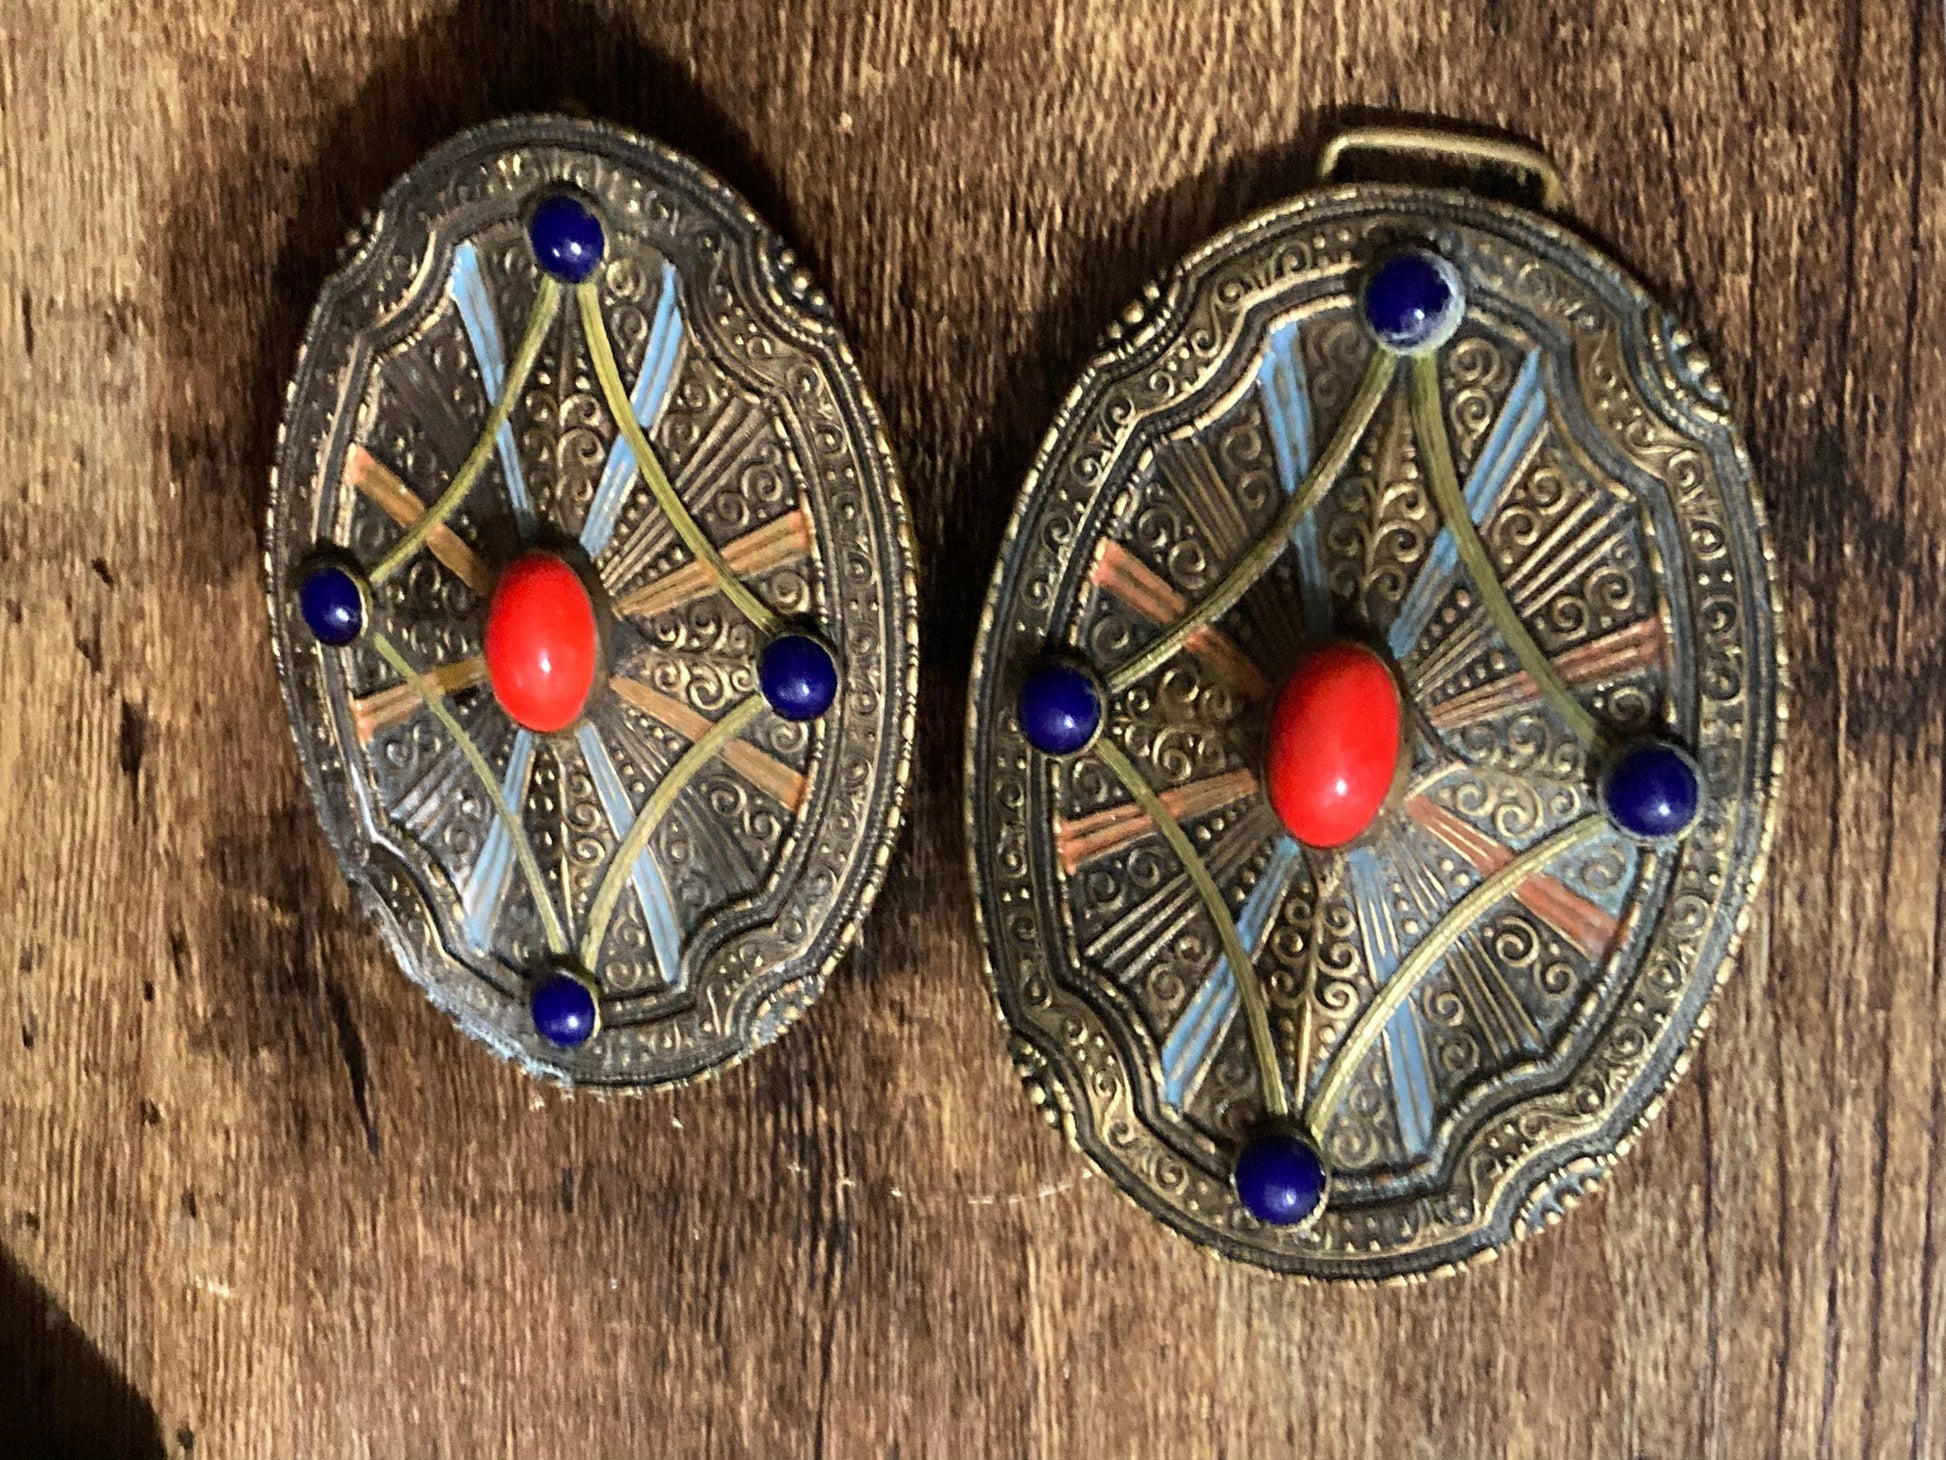 Large Art deco 2 part belt buckle Czech brass with blue and red glass stones